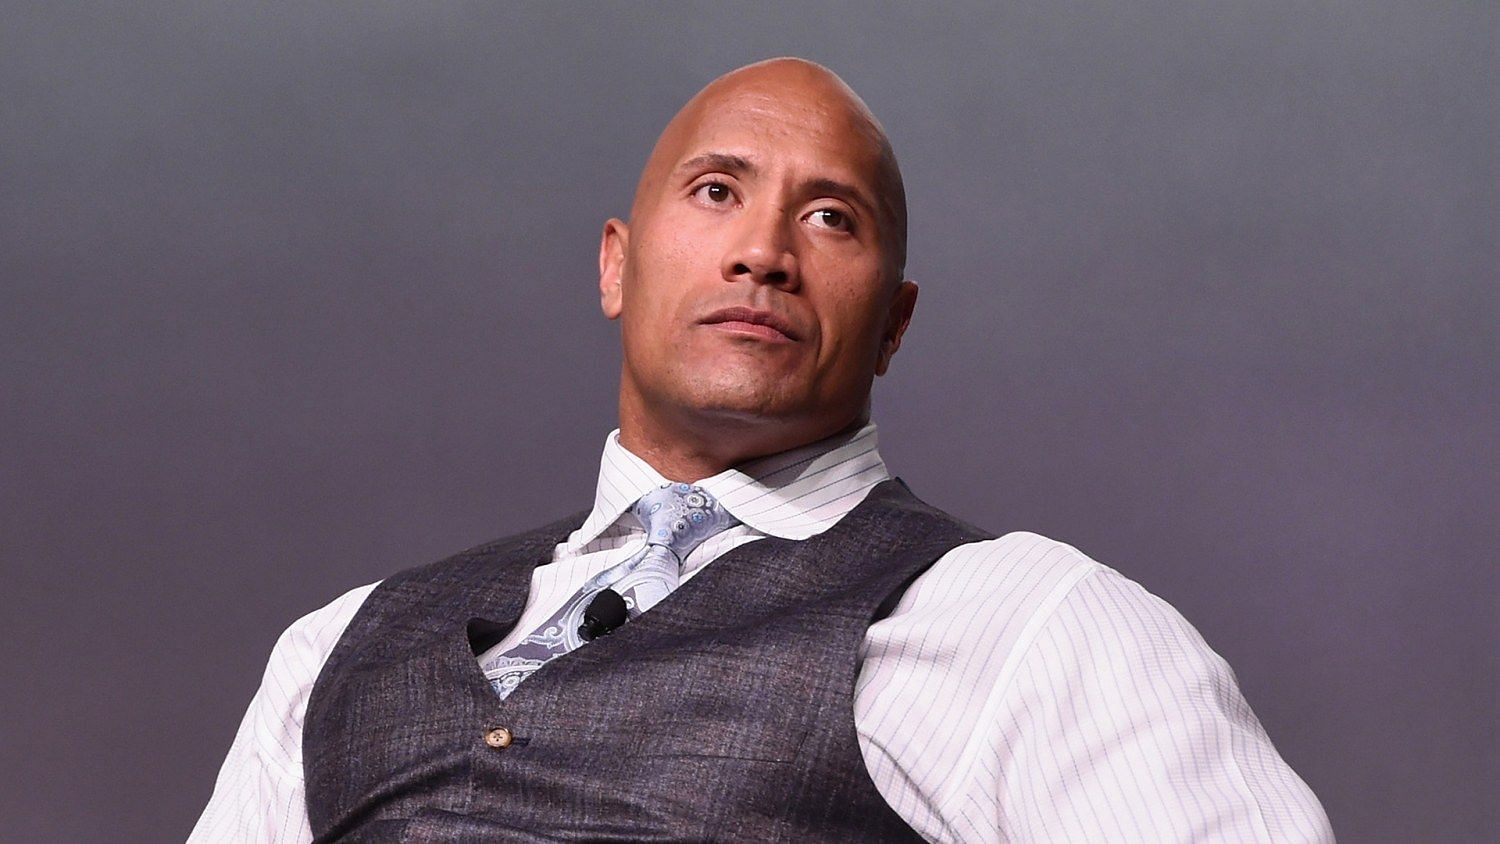 WWE legend The Rock is an incredibly busy man